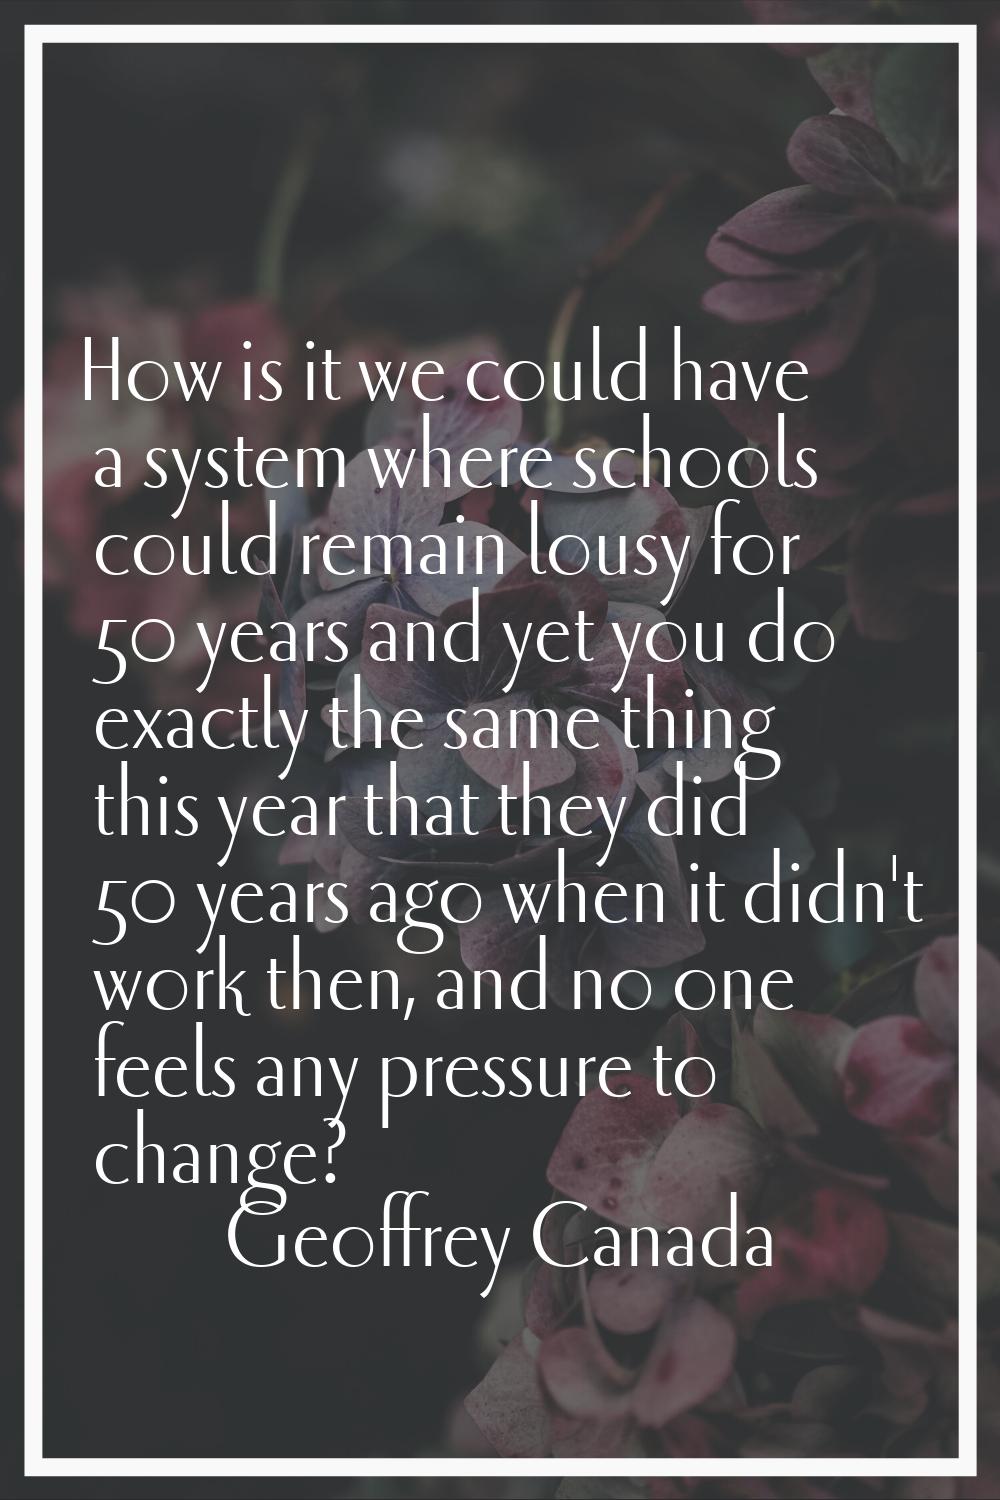 How is it we could have a system where schools could remain lousy for 50 years and yet you do exact